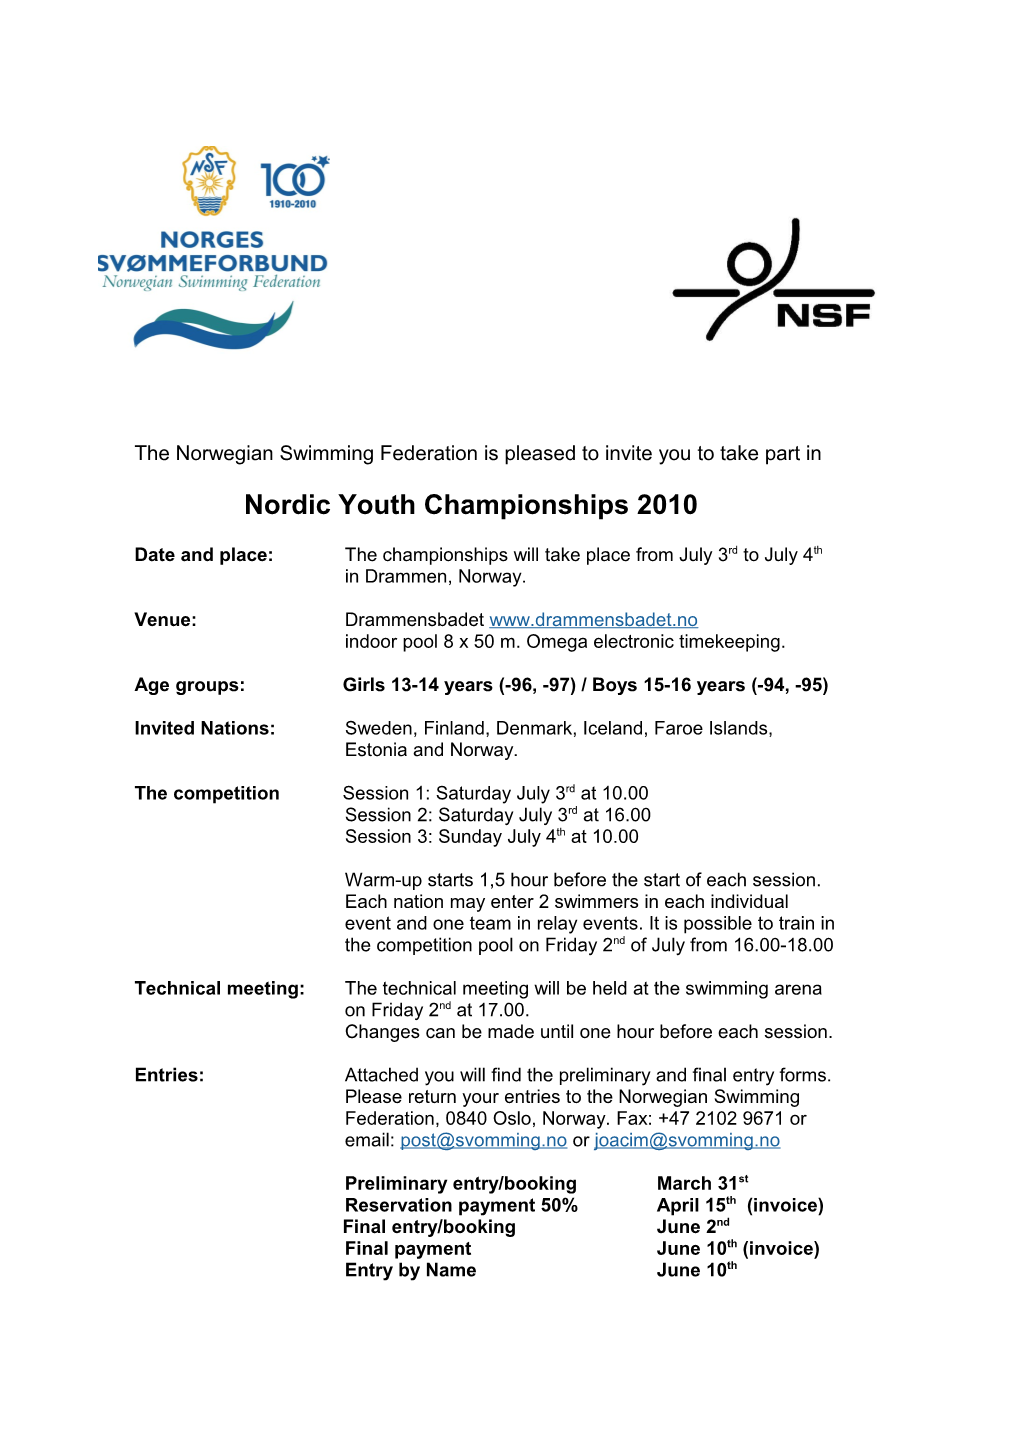 The Norwegian Swimming Federation Is Pleased to Invite You to Take Part In